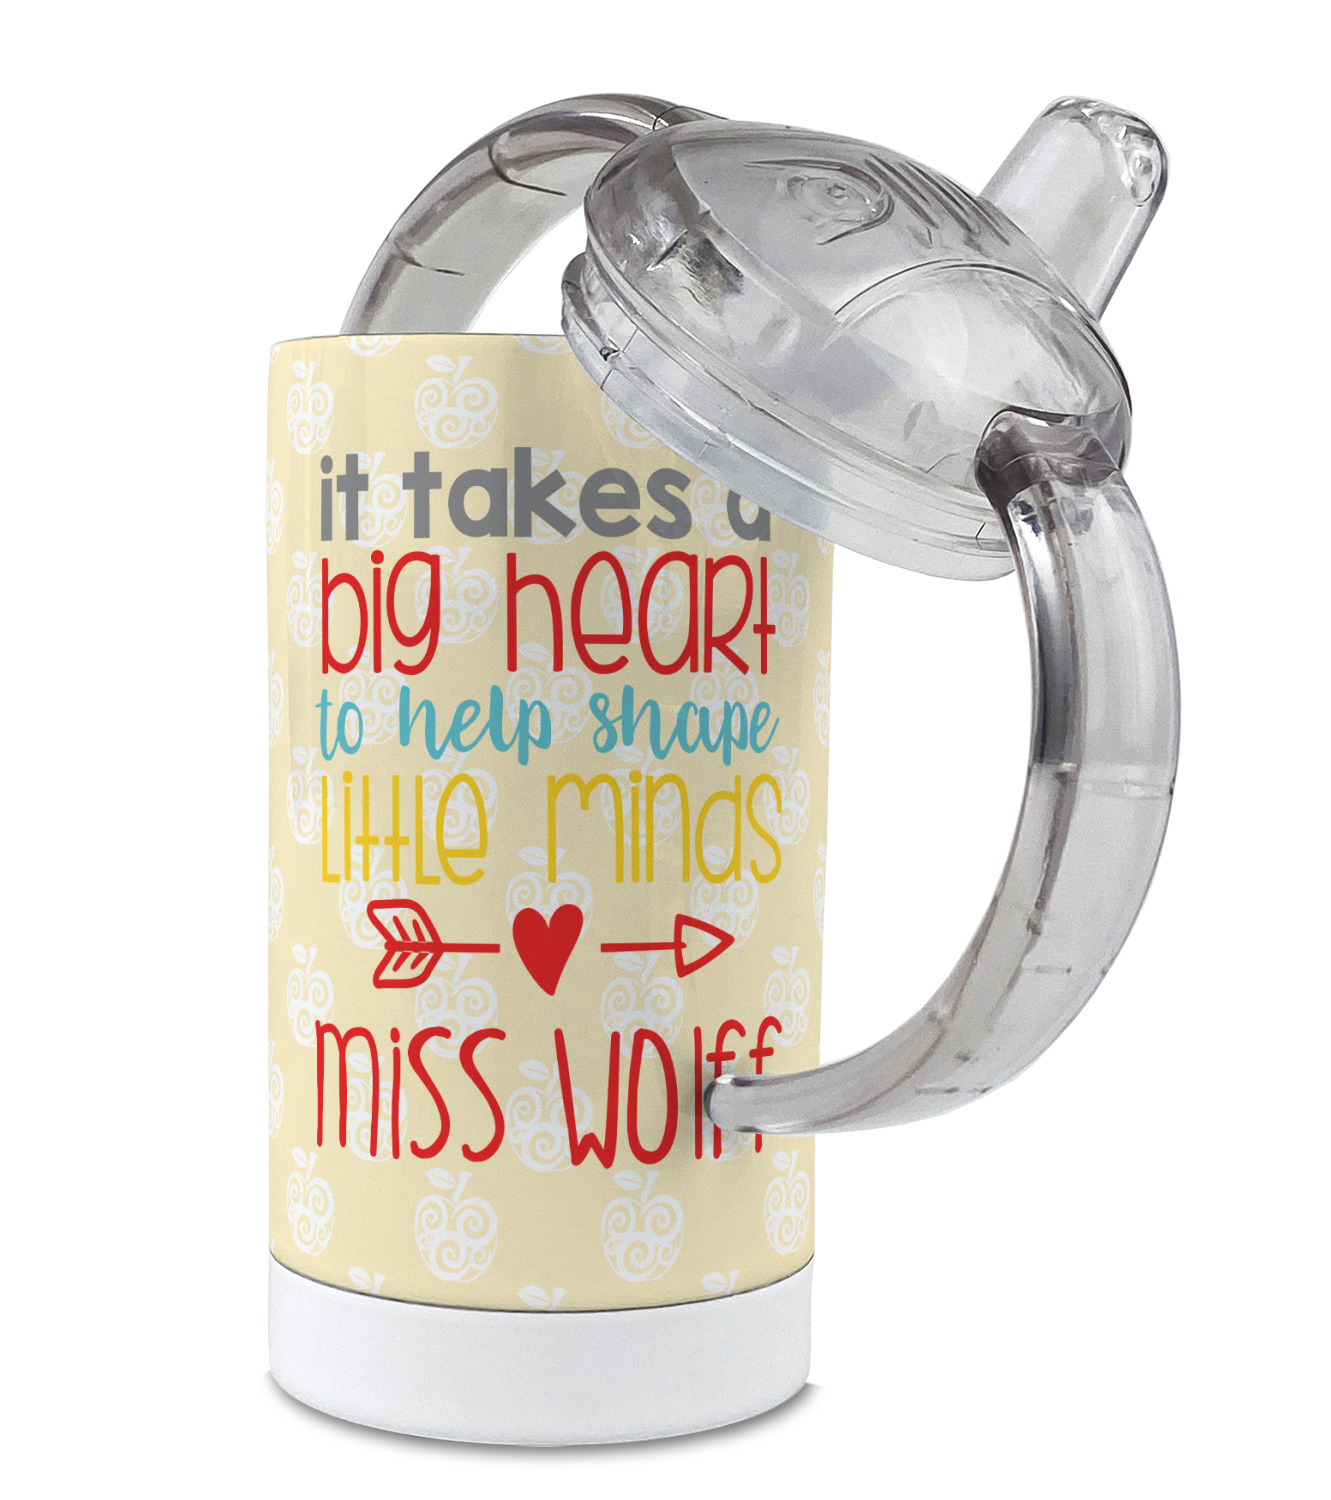 Custom 12 oz Stainless Steel Sippy Cups, Design & Preview Online